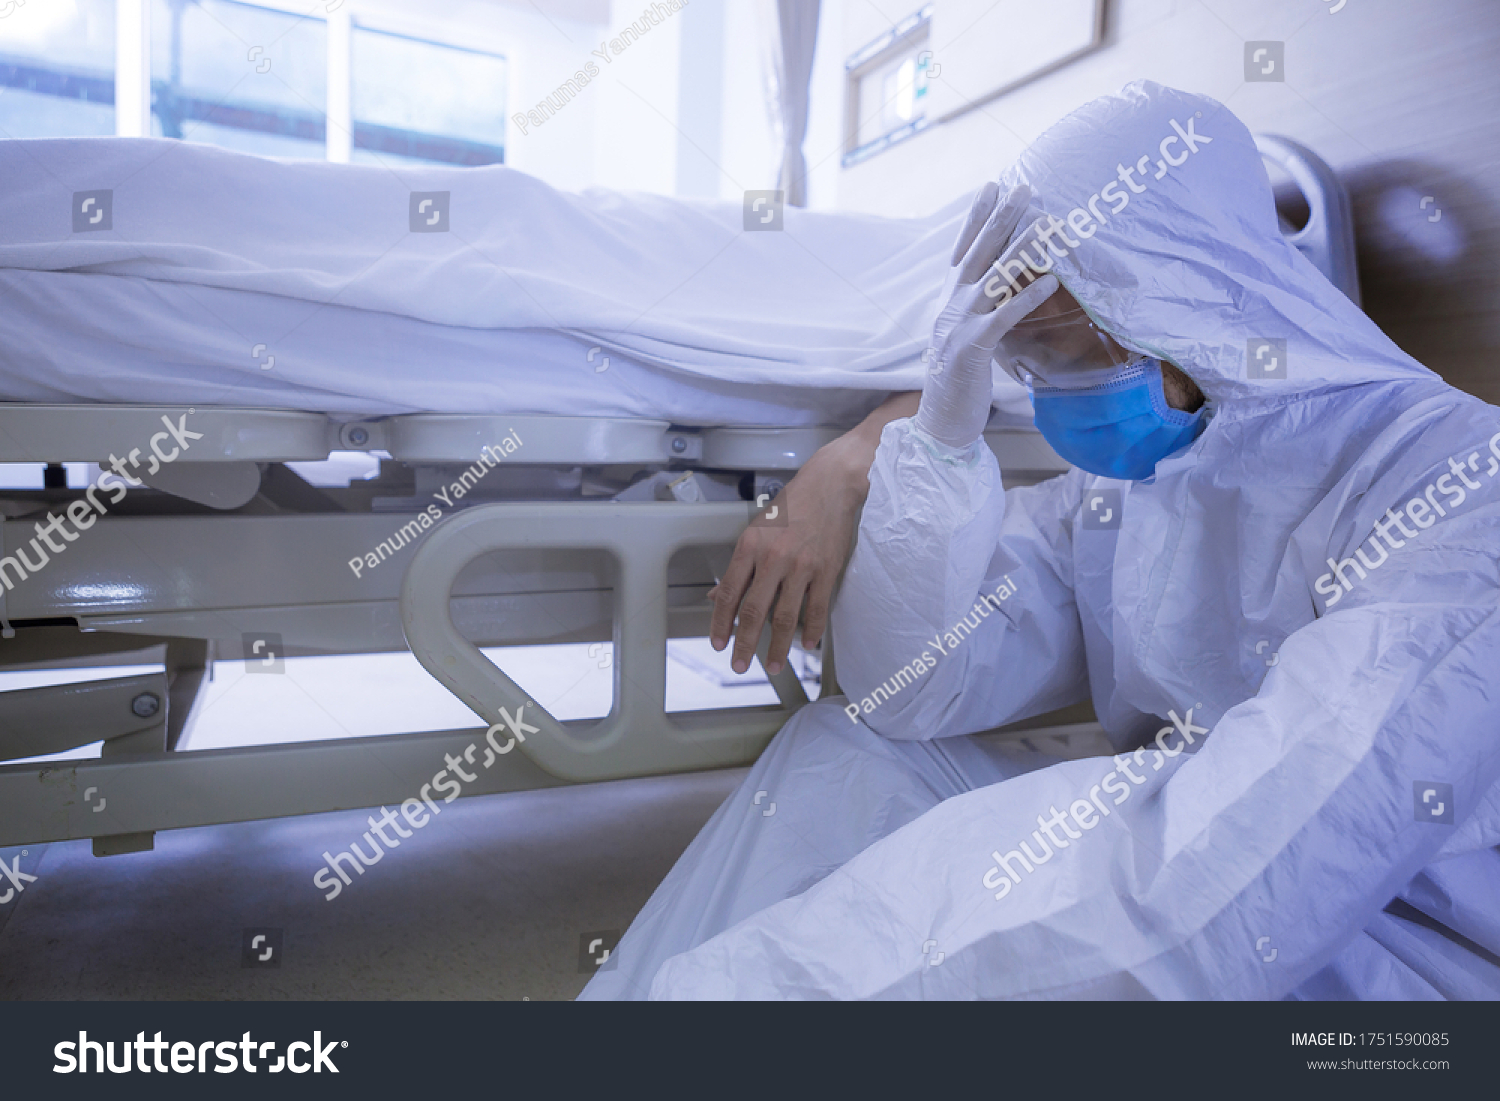 Doctor in protective suit, sadness and depressed beside Coronavirus victim body on bed after the death of patient. #1751590085